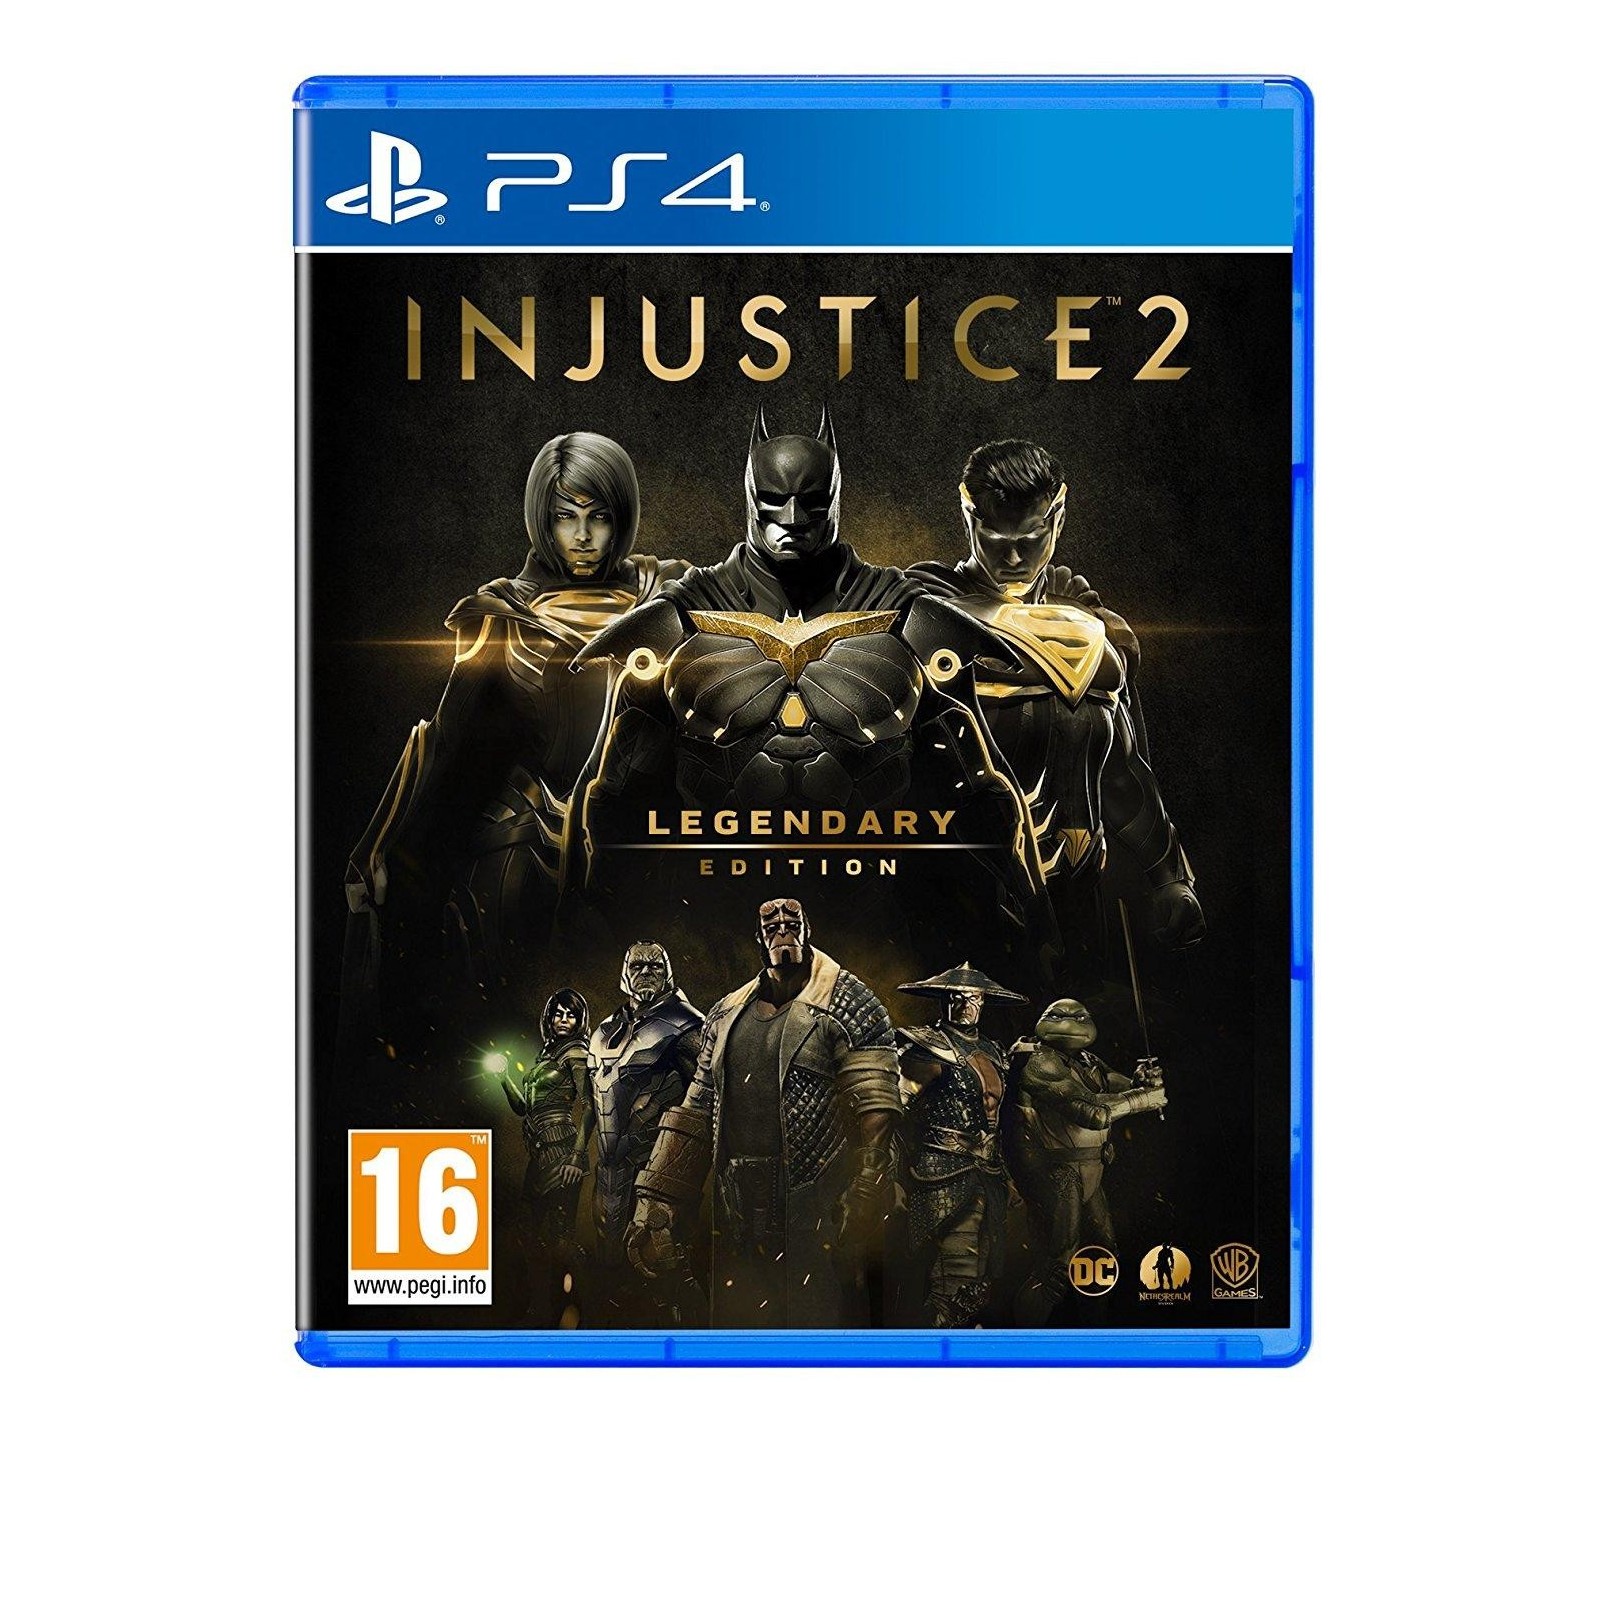 Injustice 2: Legendary Edition Ps4